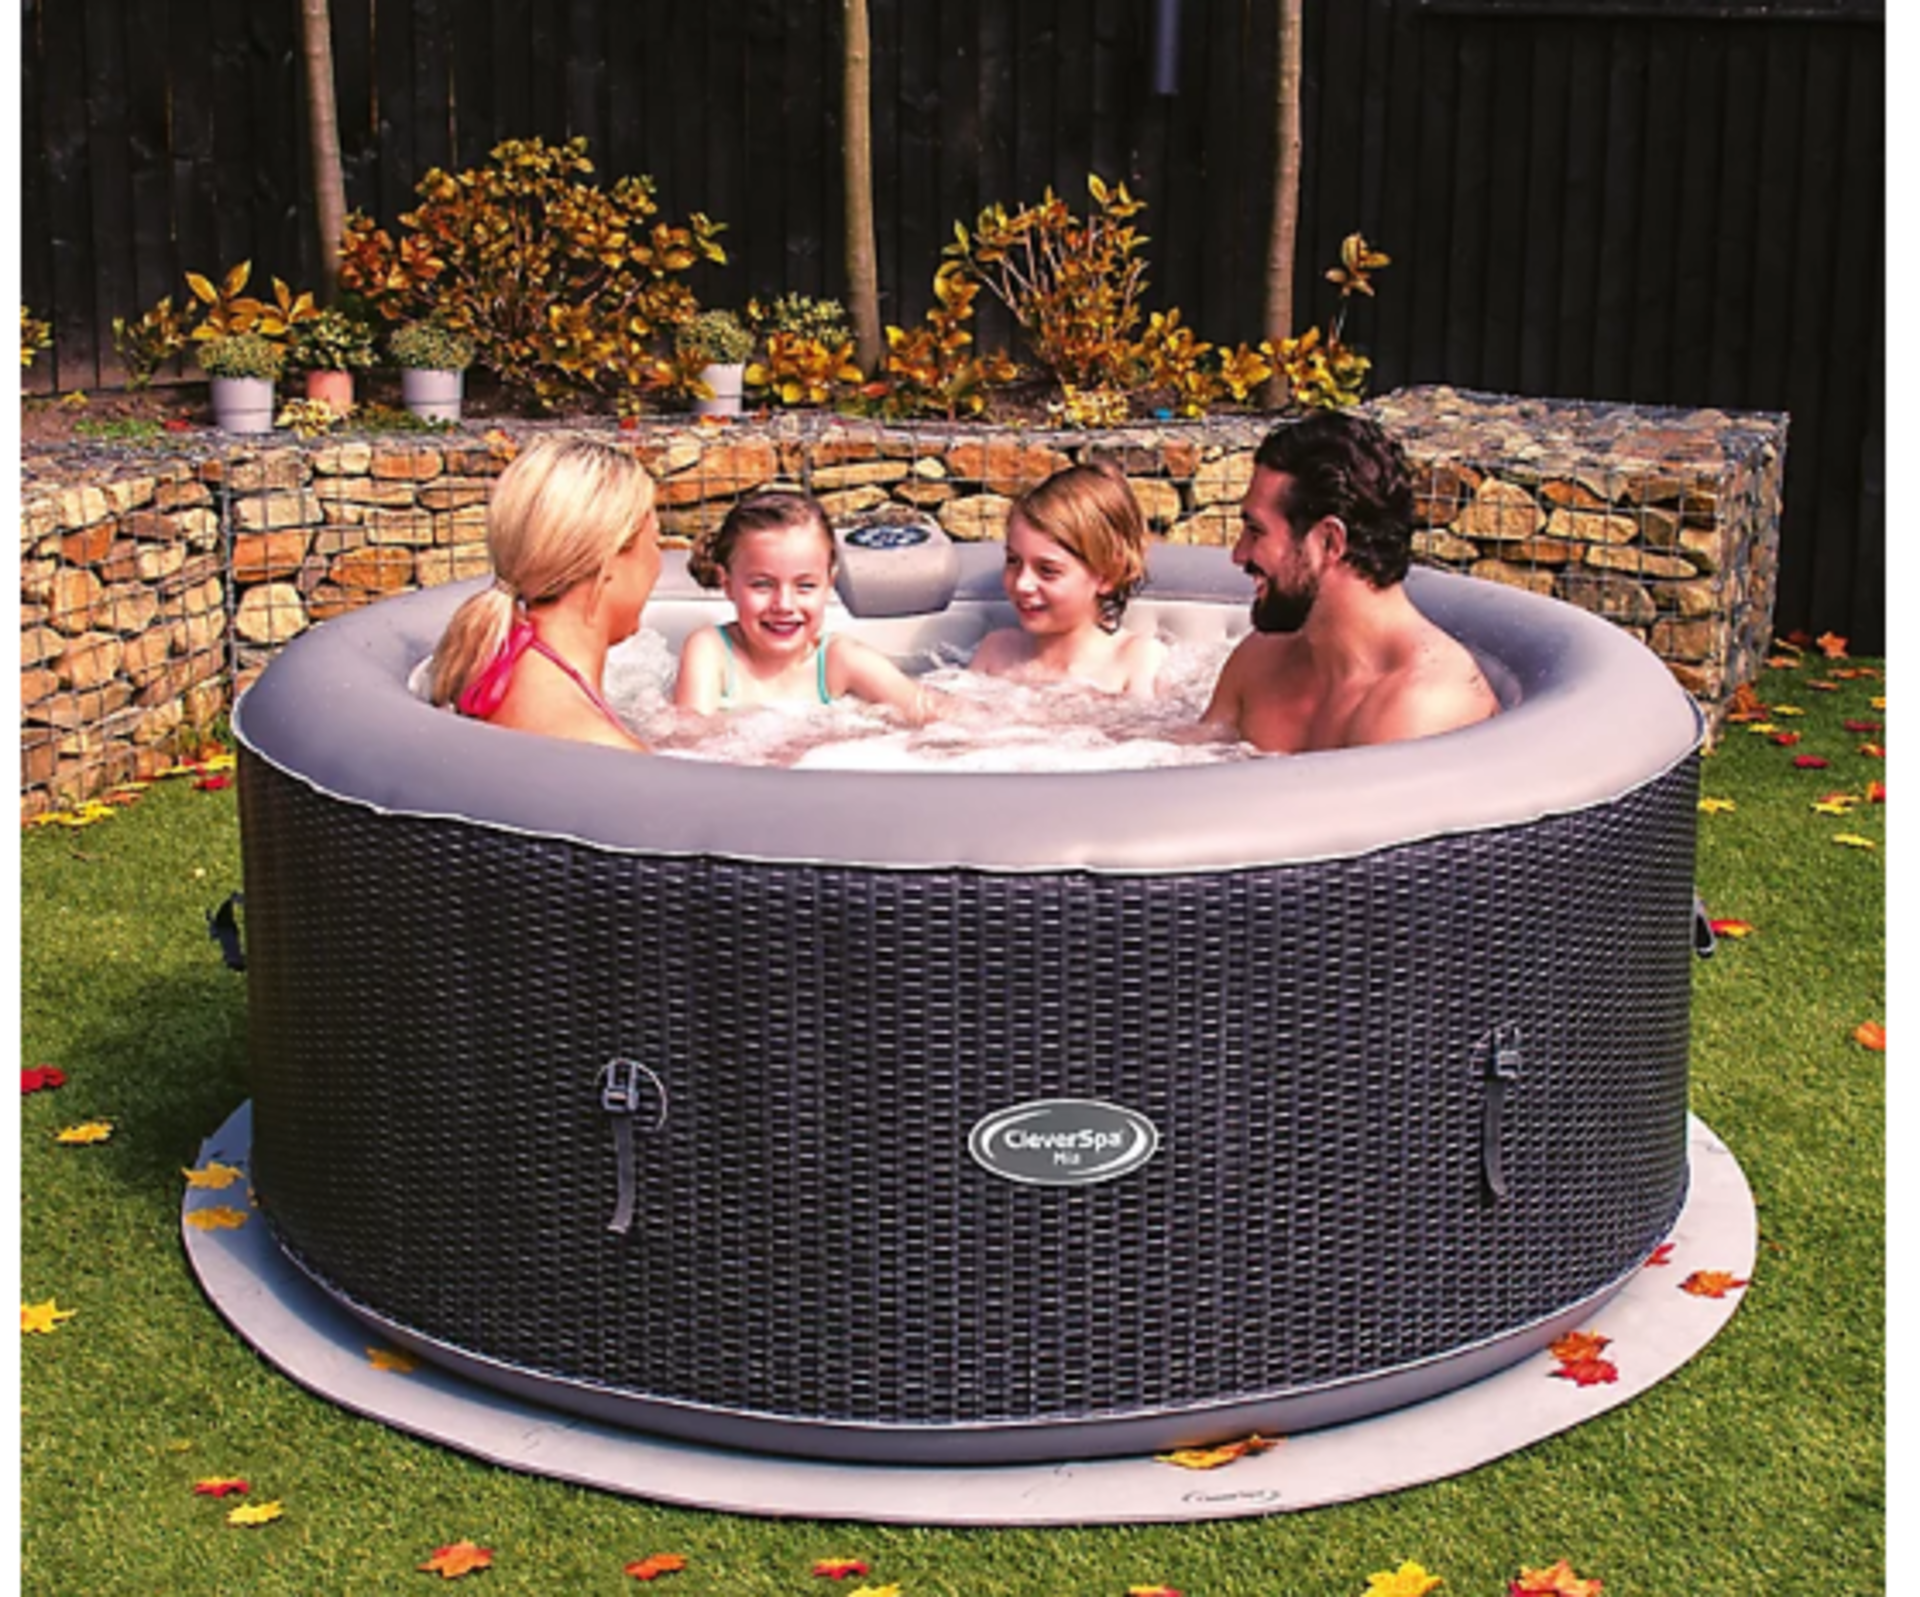 CleverSpa Mia 4 Person Hot tub. - ER. RRP £299.00. A great way to get into the spa lifestyle if - Image 2 of 2